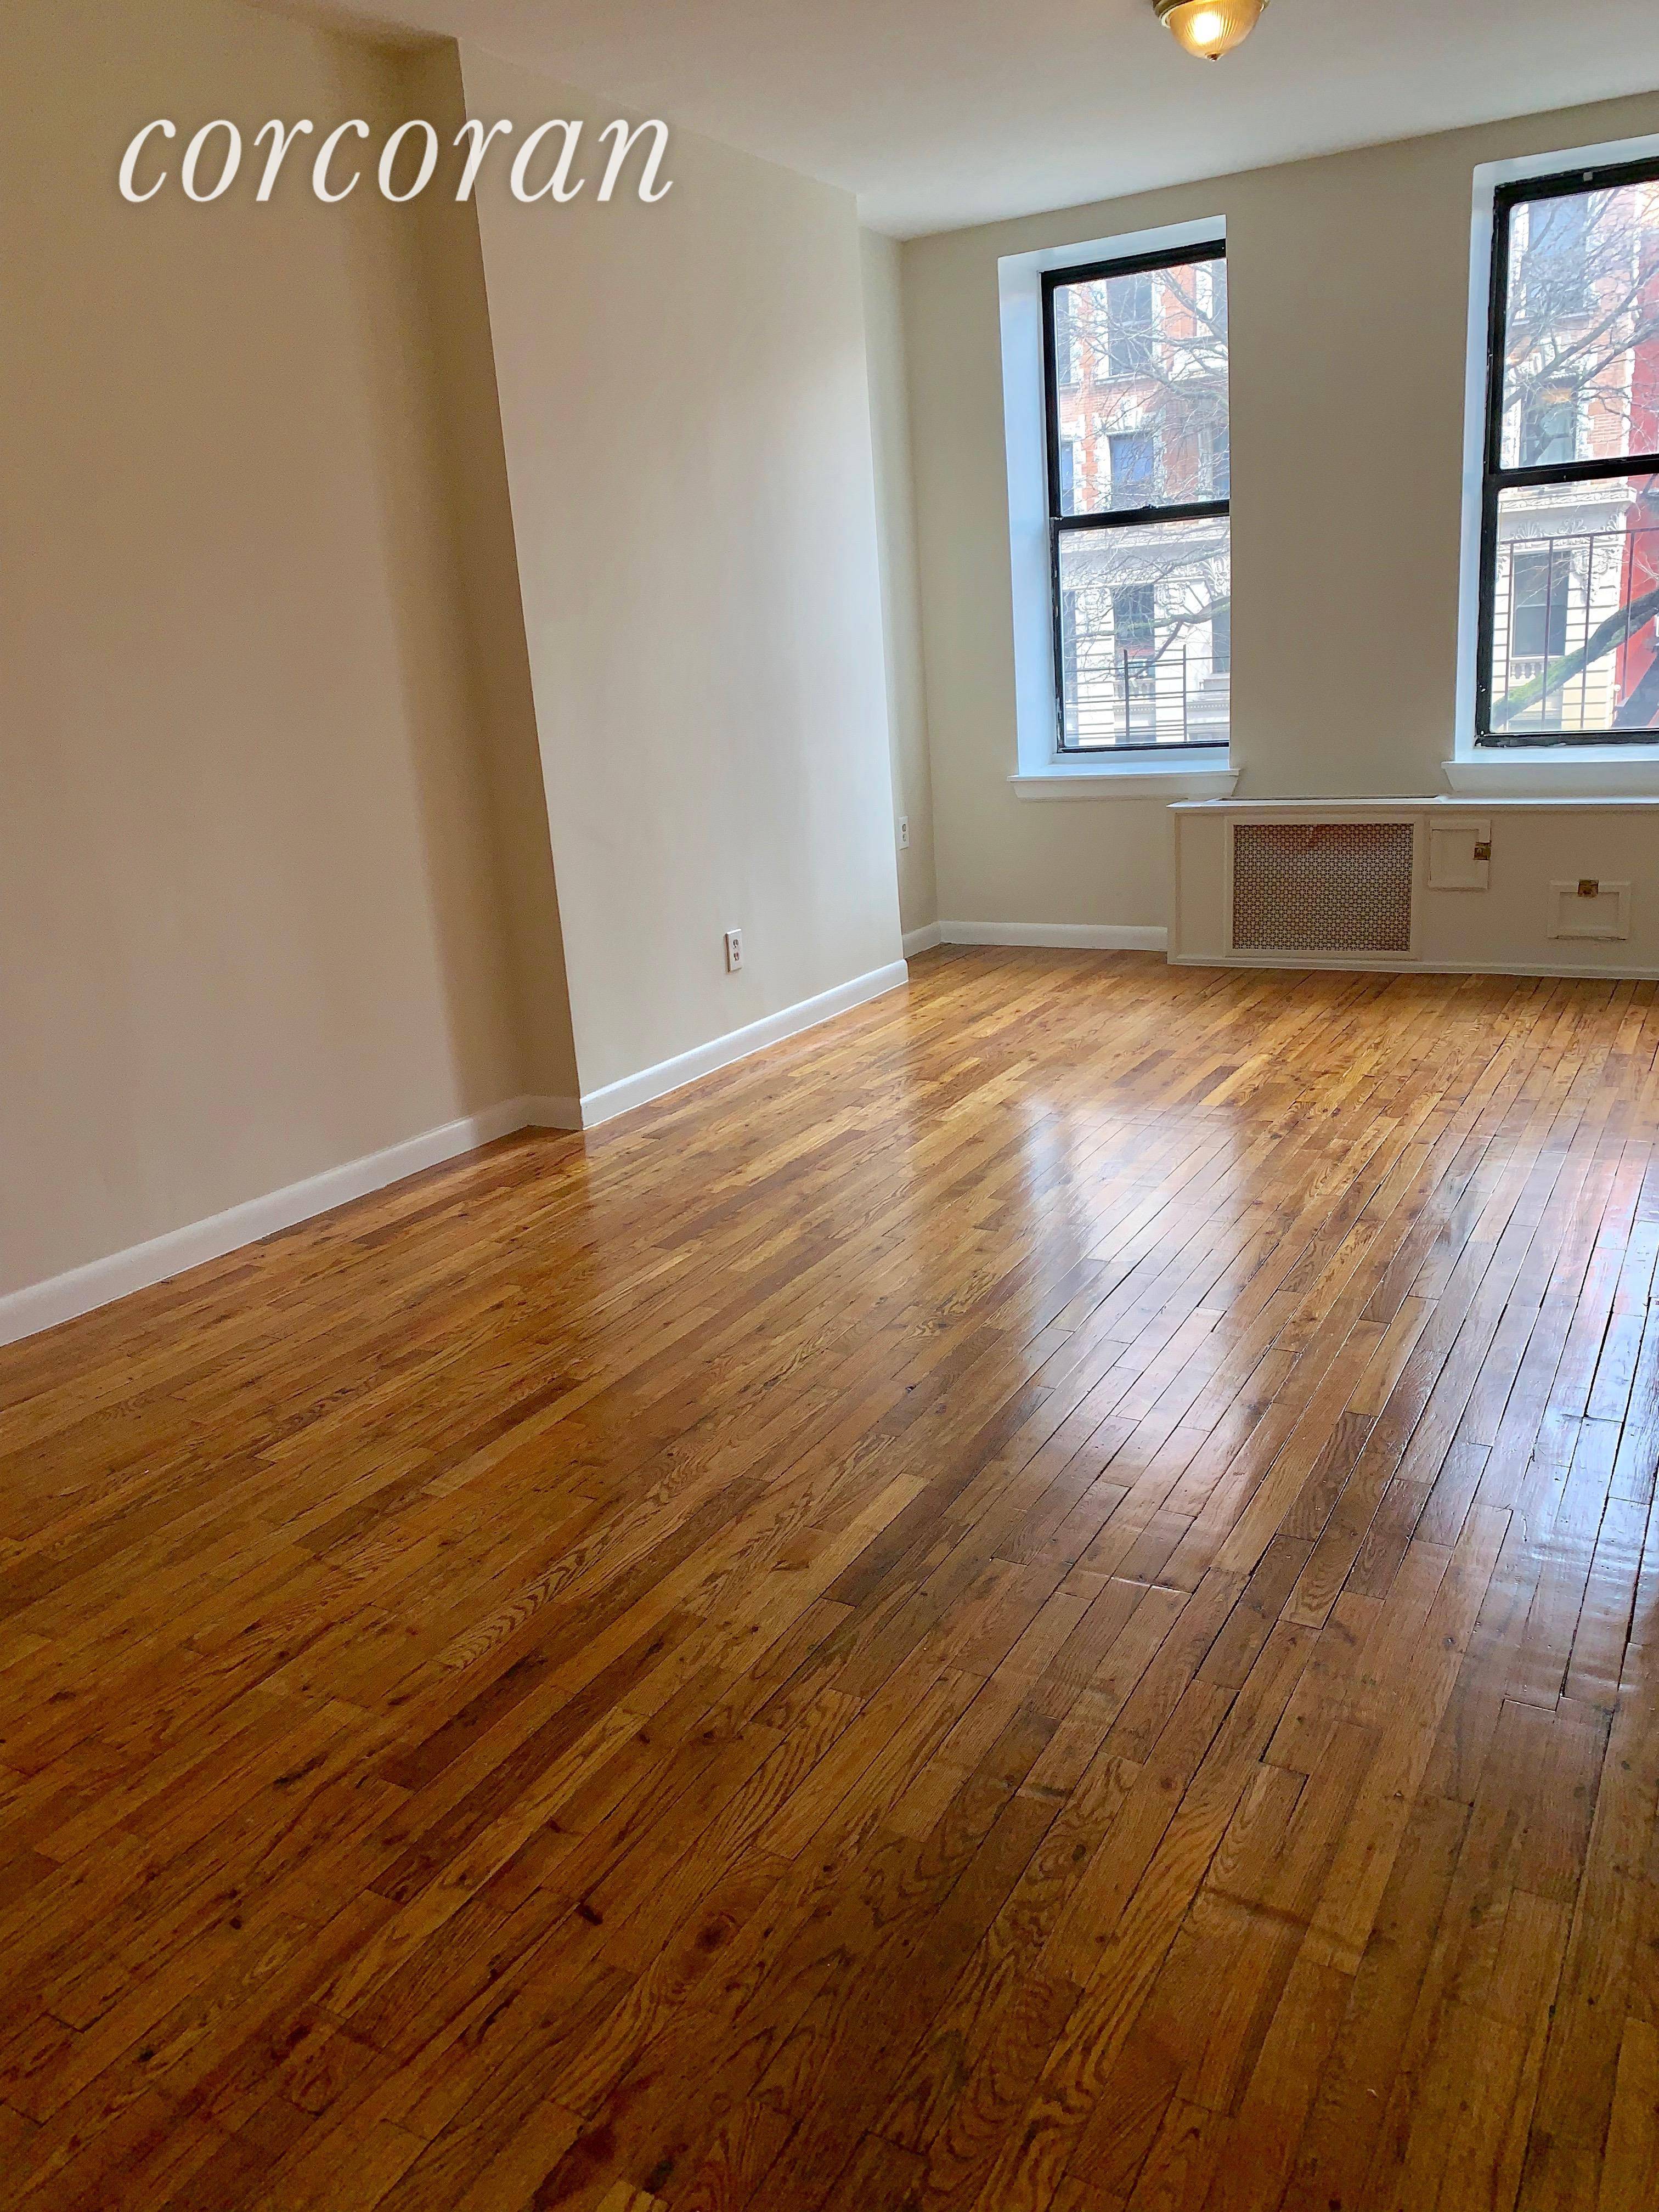 Located between Morningside Avenue and Manhattan Avenue on 116th Street this beautiful 2 Bed 1 Bath apartment is a block away from Columbia University and across the street from Morningside ...